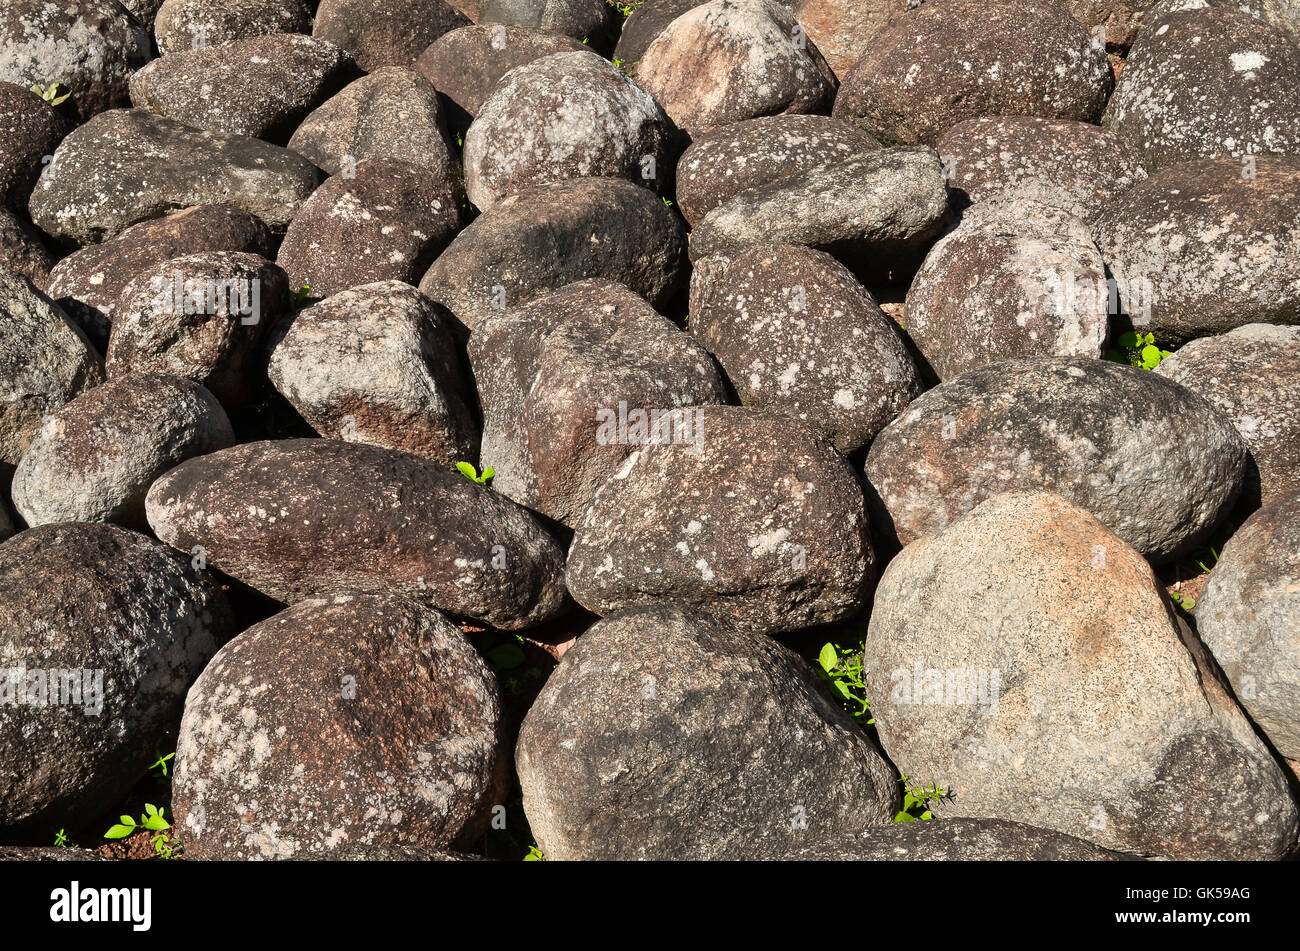 abstract background with dry round feeble stones Stock Photo